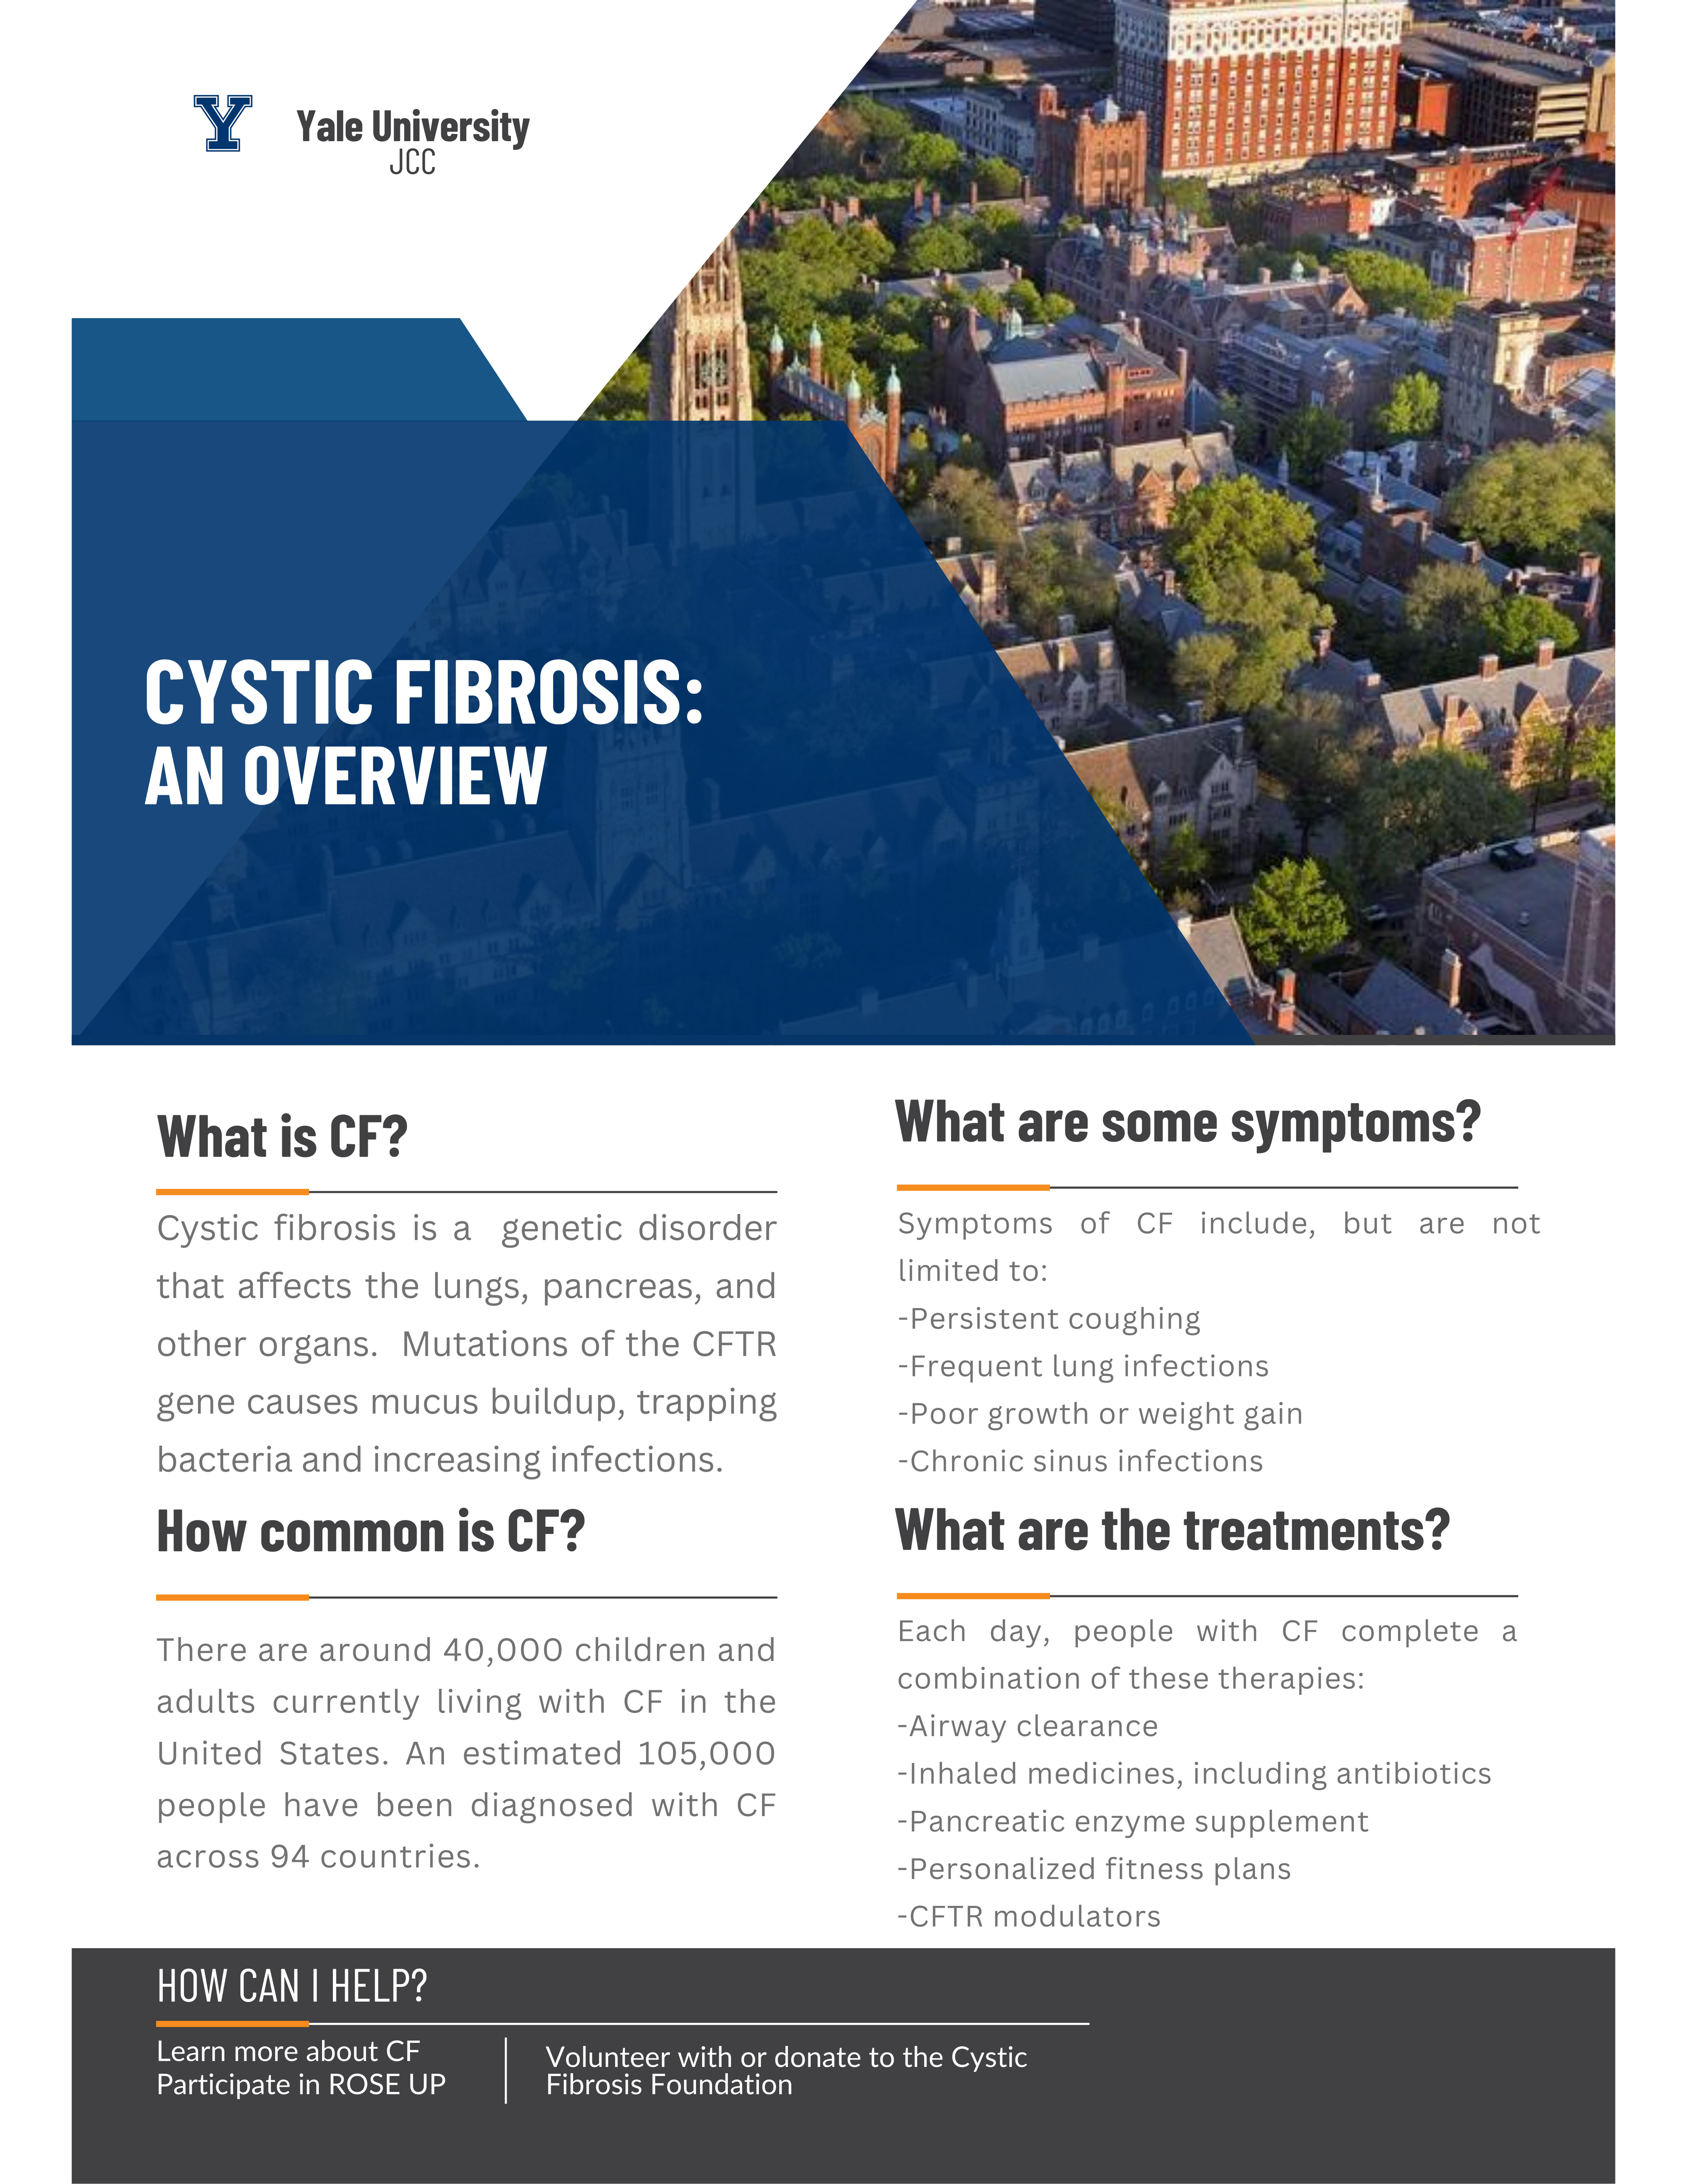 On Cystic Fibrosis and the Foundation